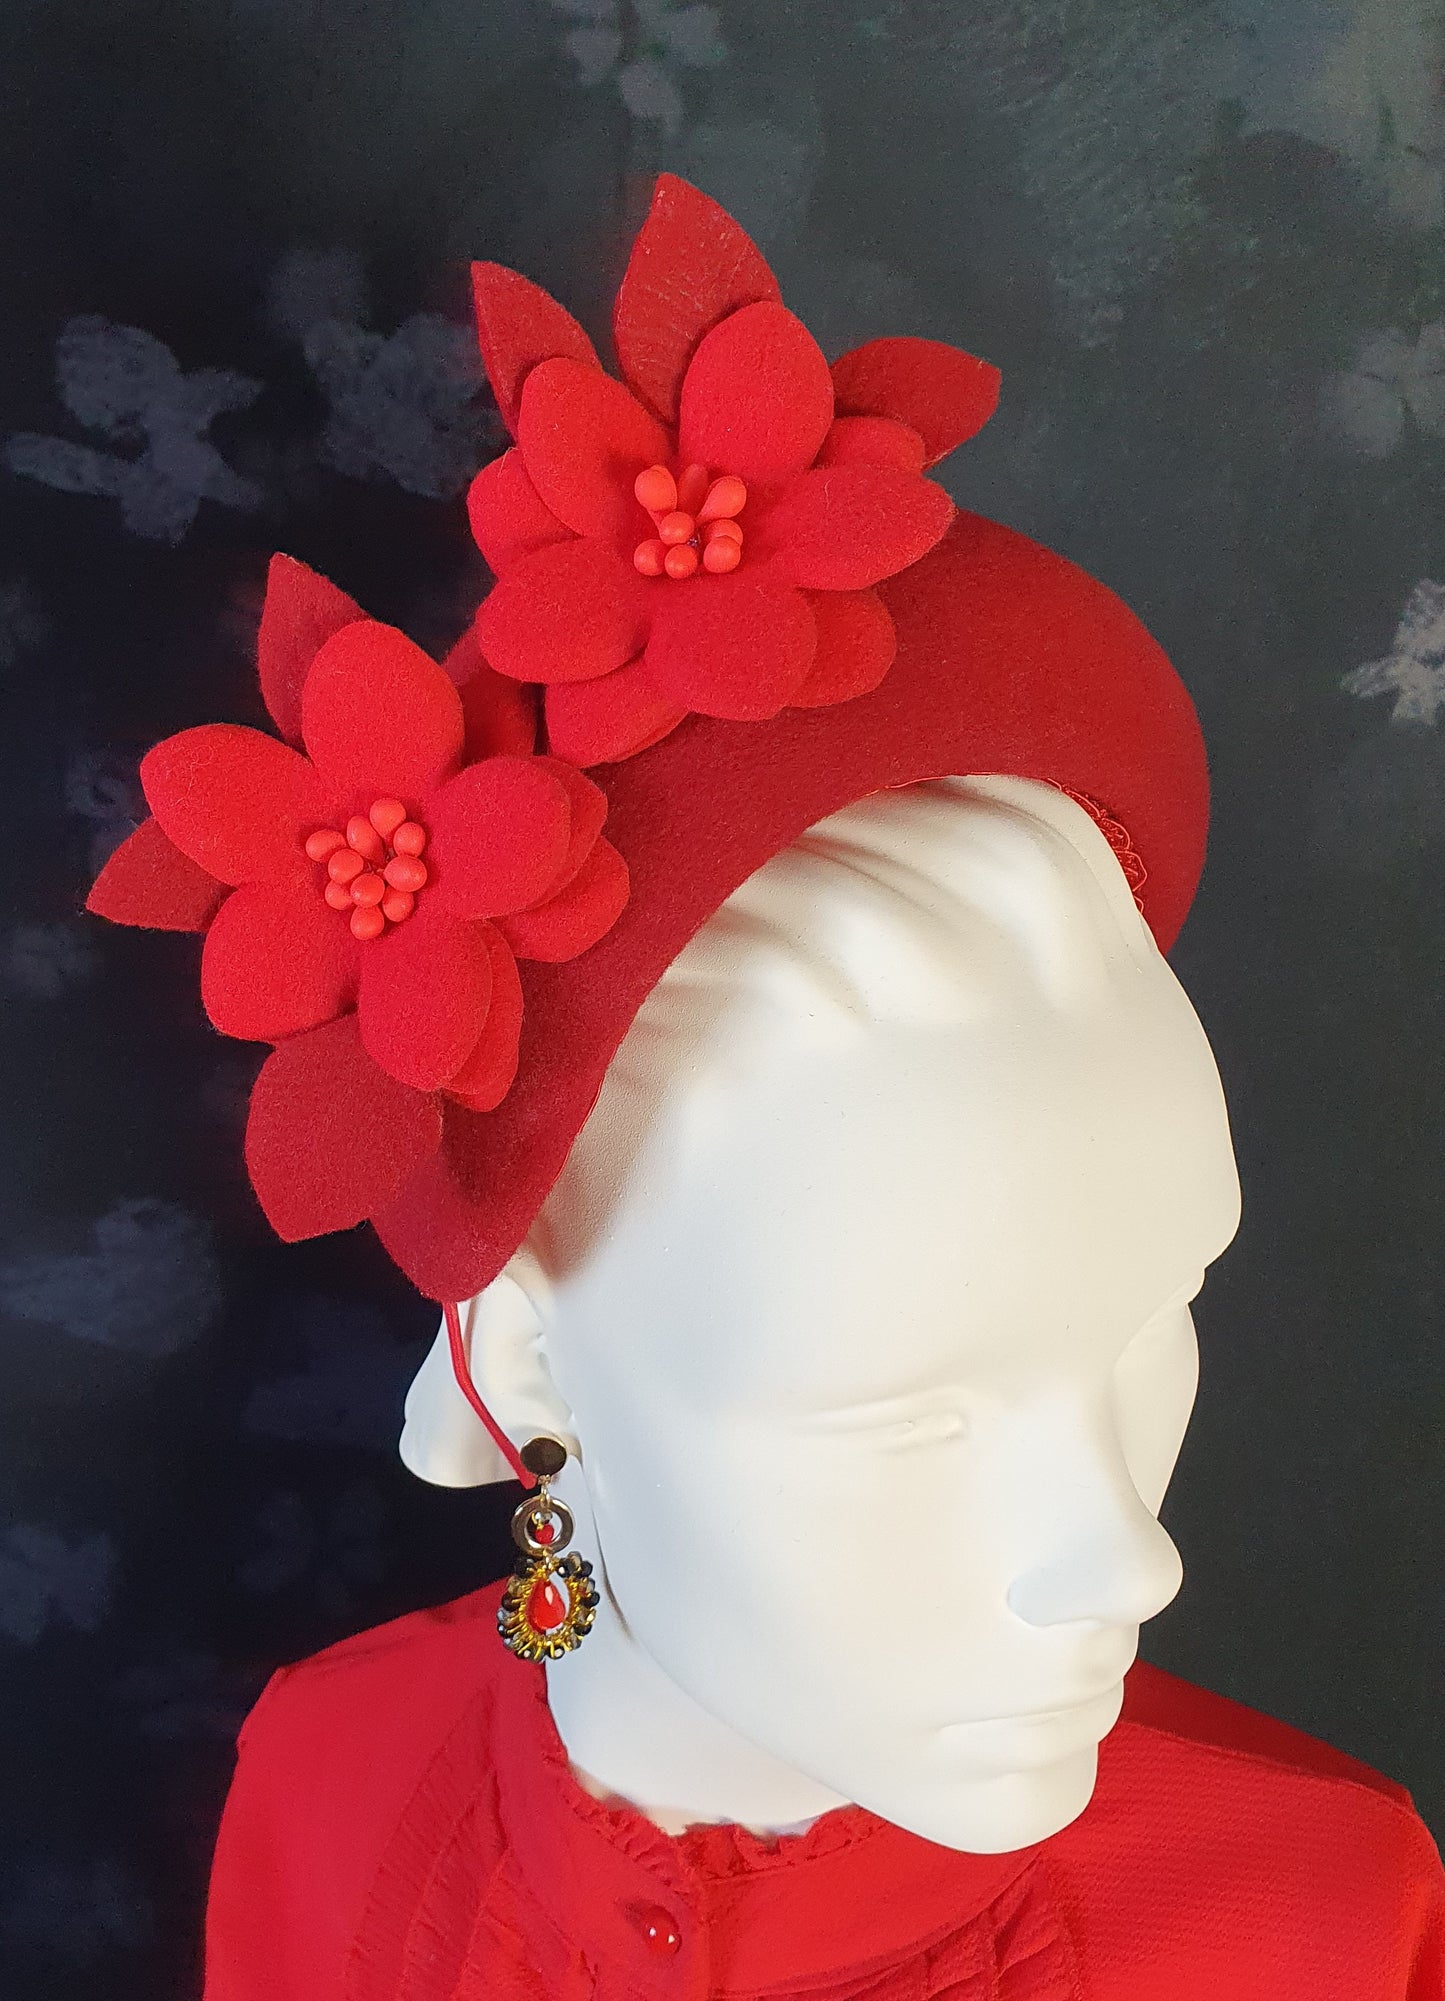 Red felt headband with flowers and leaves - handmade accessory for guests, brides &amp; special occasions